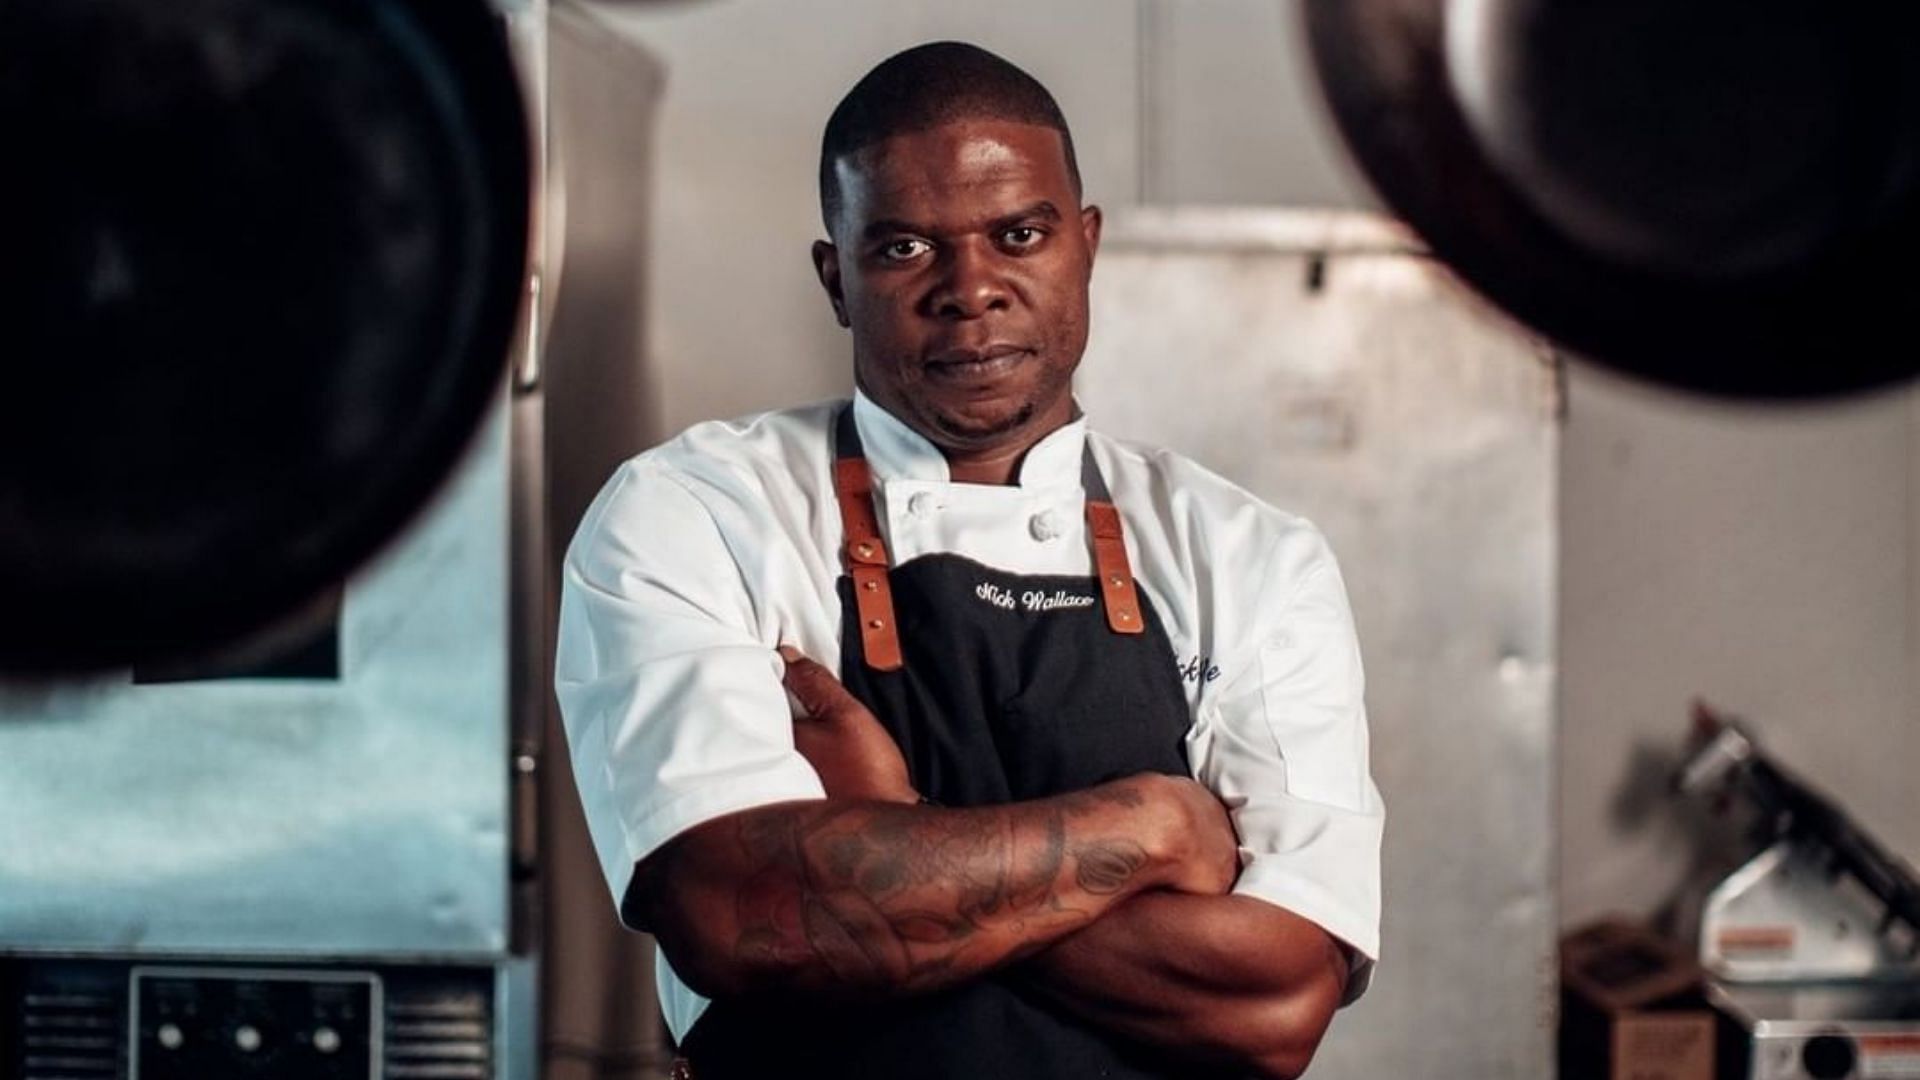 Meet Nick Wallace from Top Chef Season 19 (Image via nickwallaceculinary/Instagram)